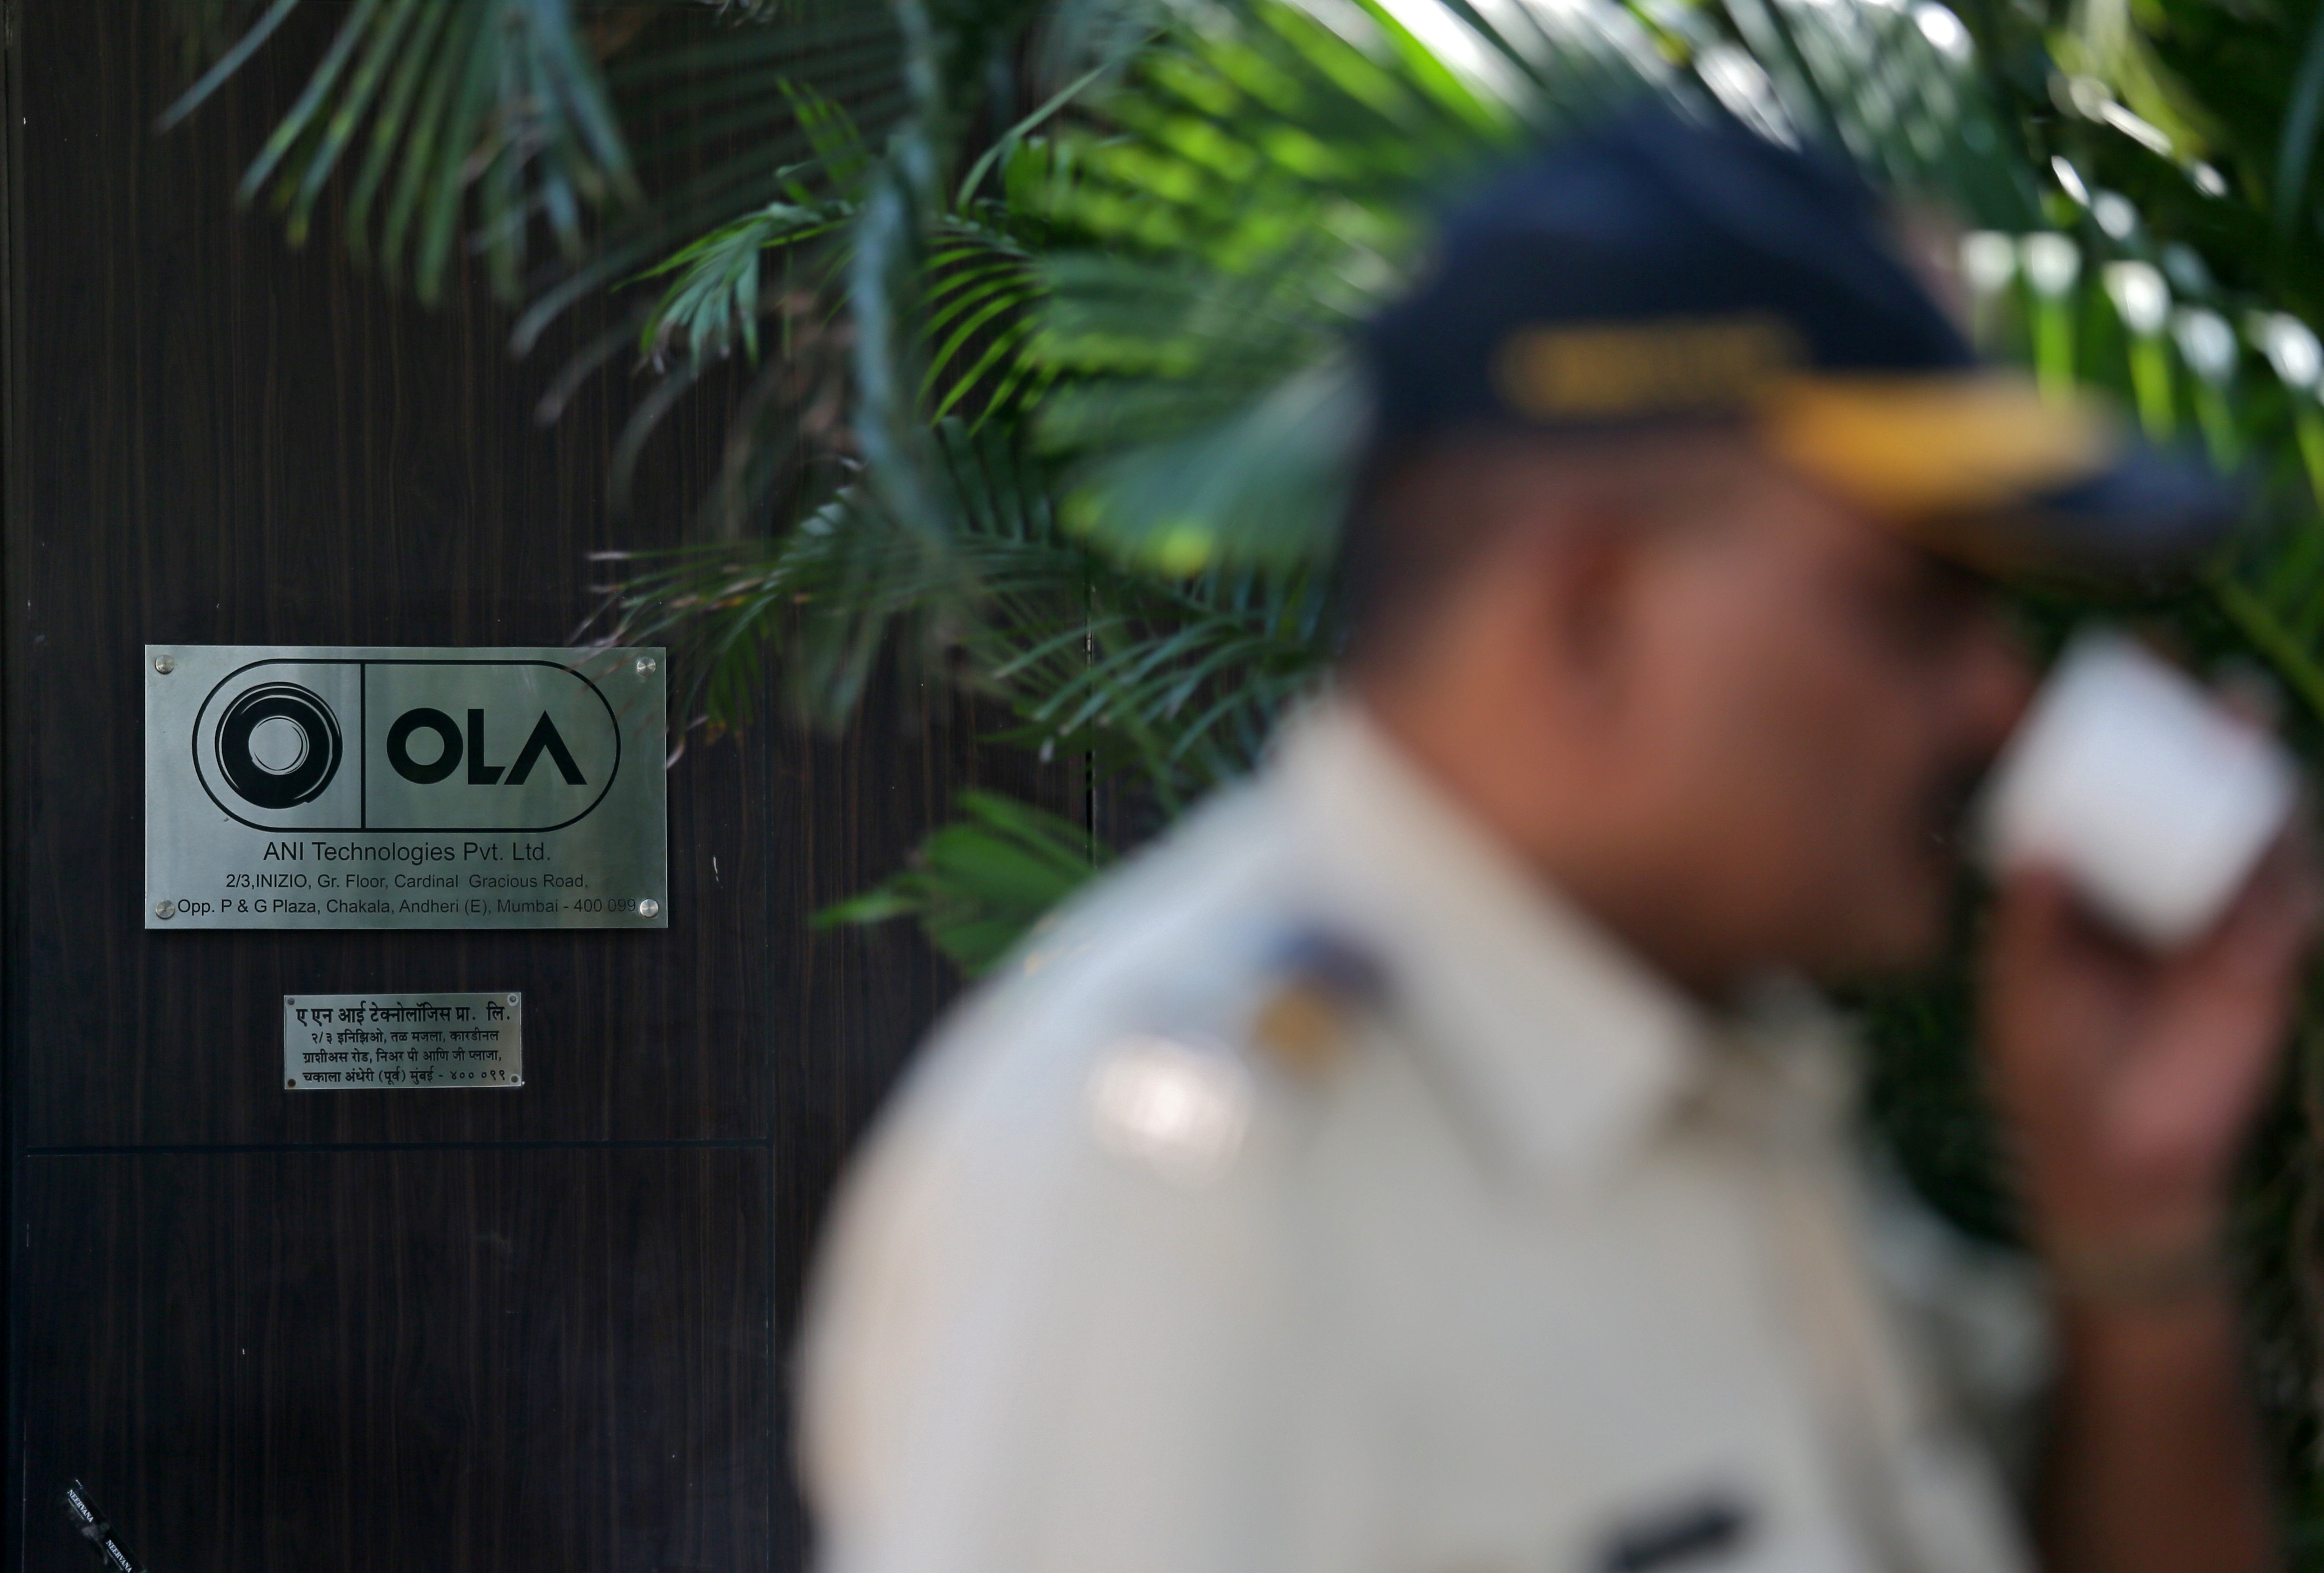 A policeman drinks tea in front of Ola's office in Mumbai